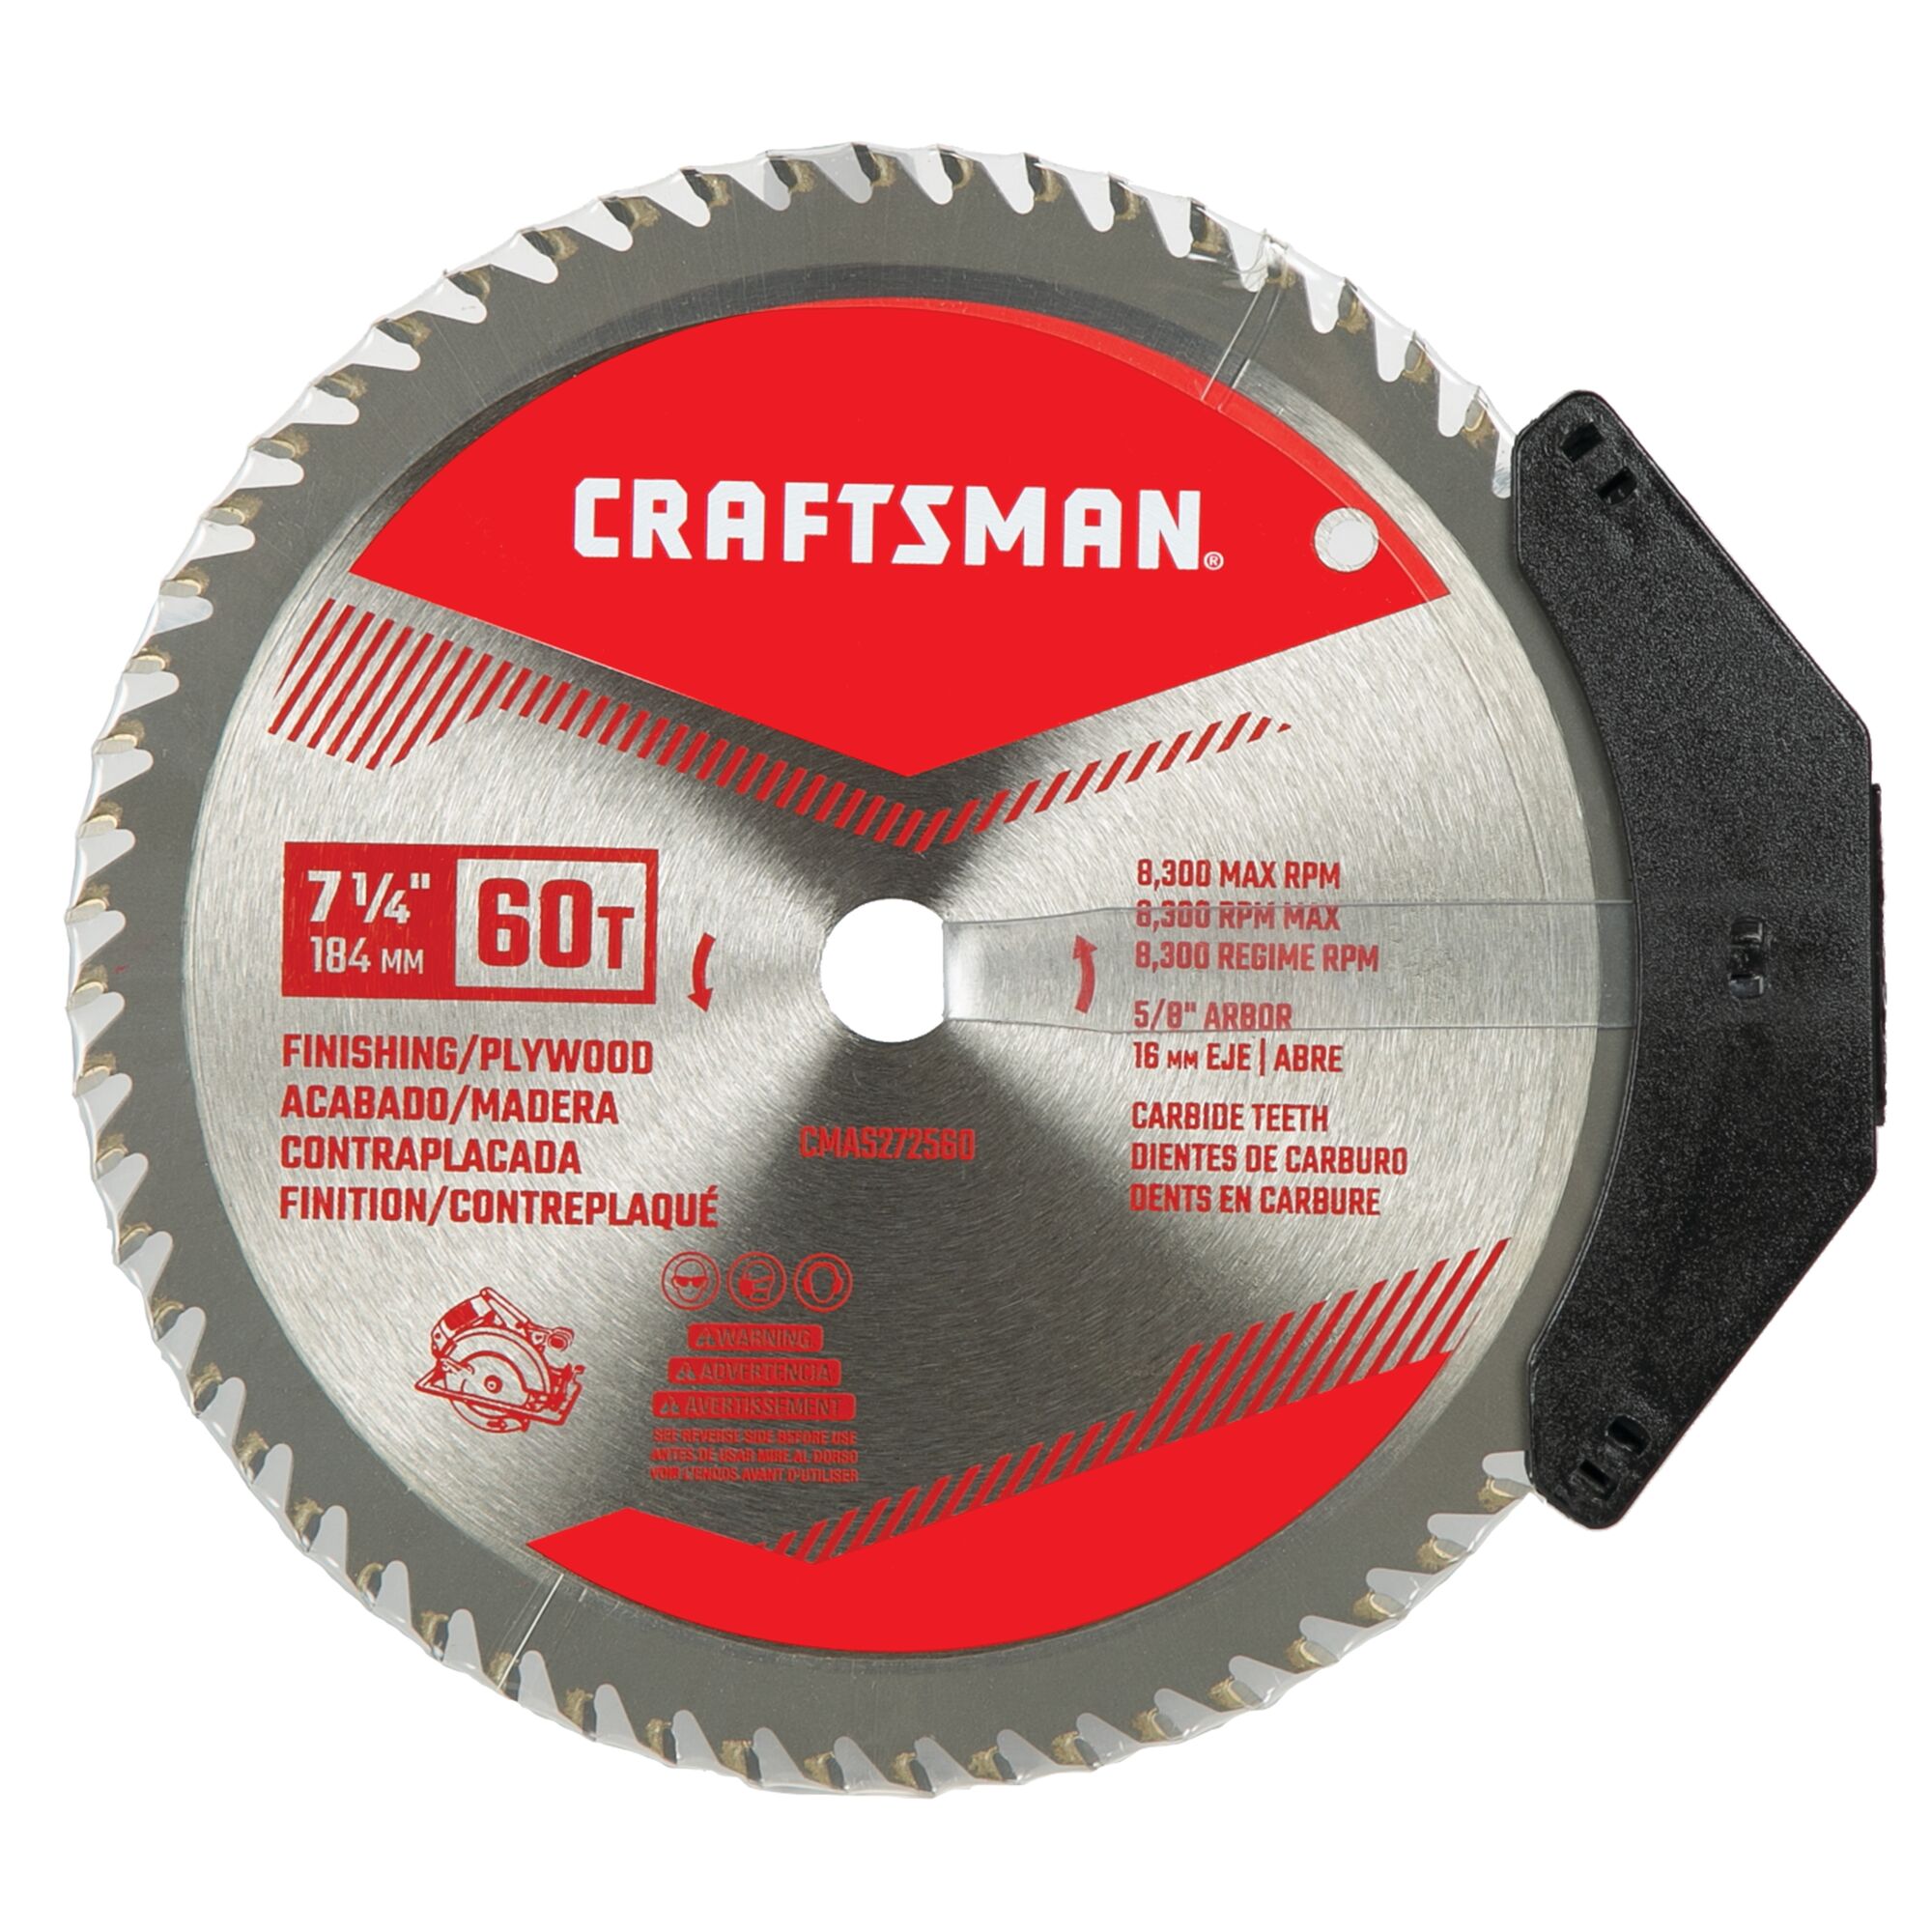 7 and a quarter inch 60 tooth finishing plywood saw blade in plastic packaging.